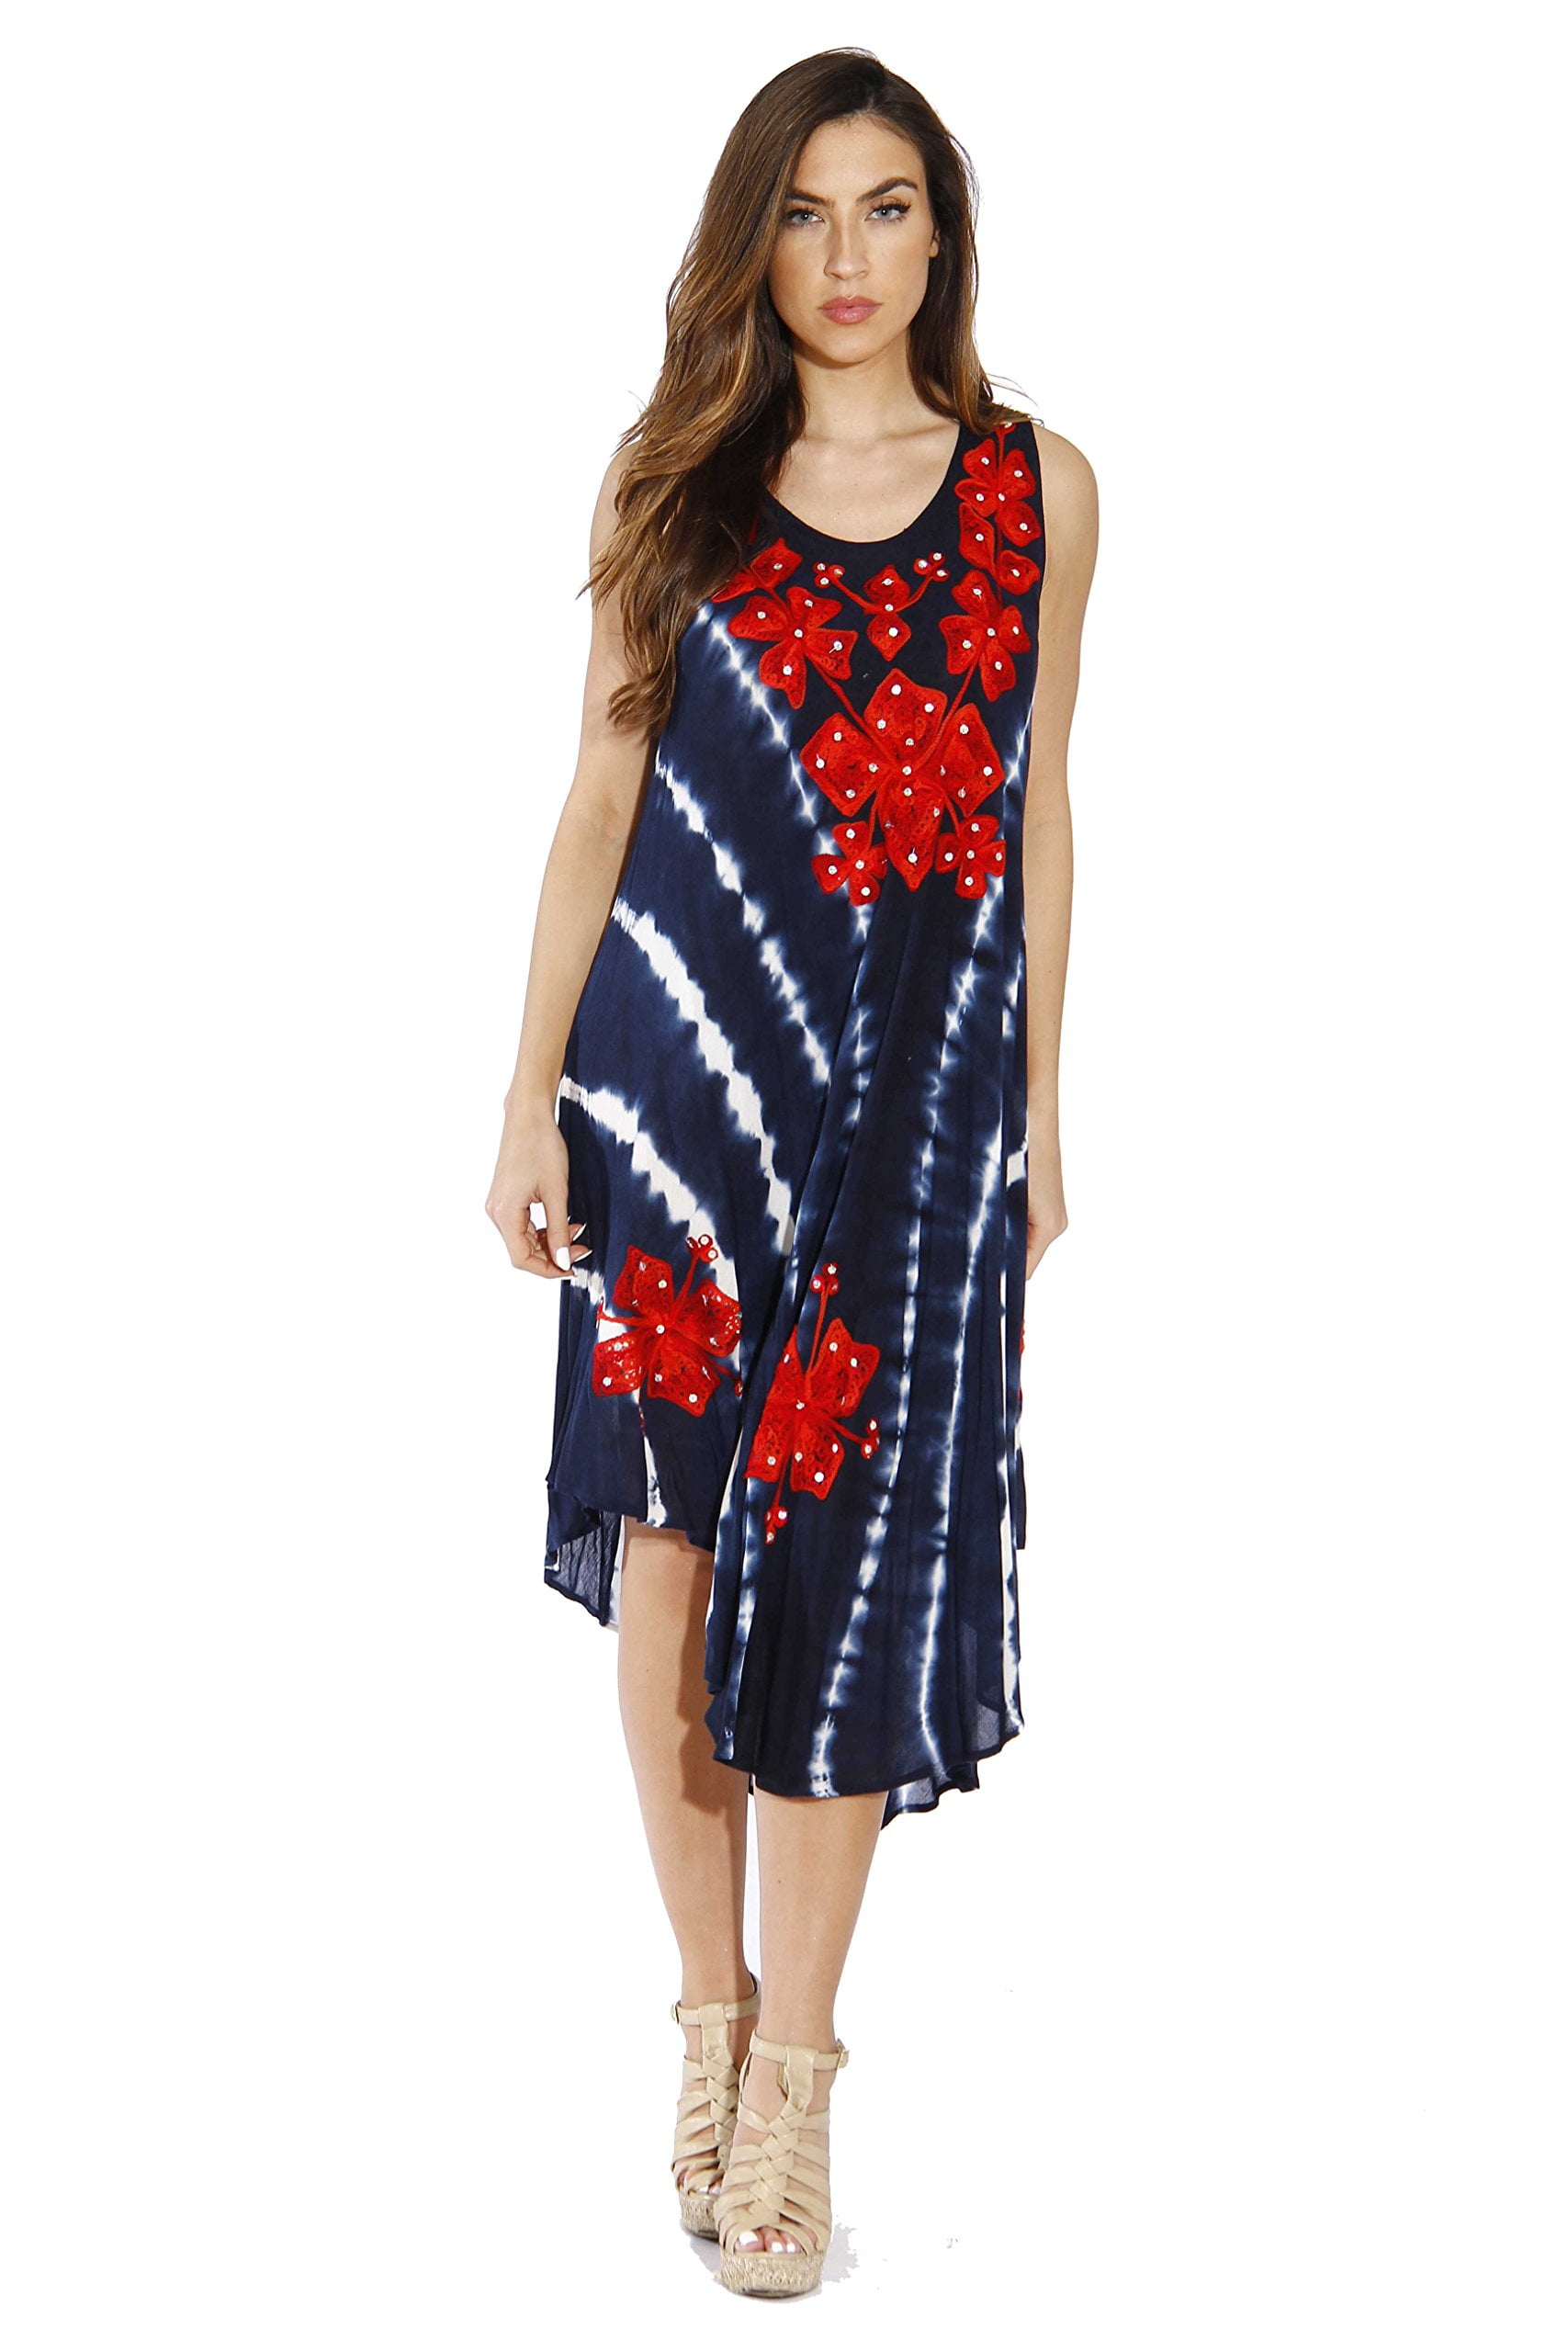 red white and blue sun dress